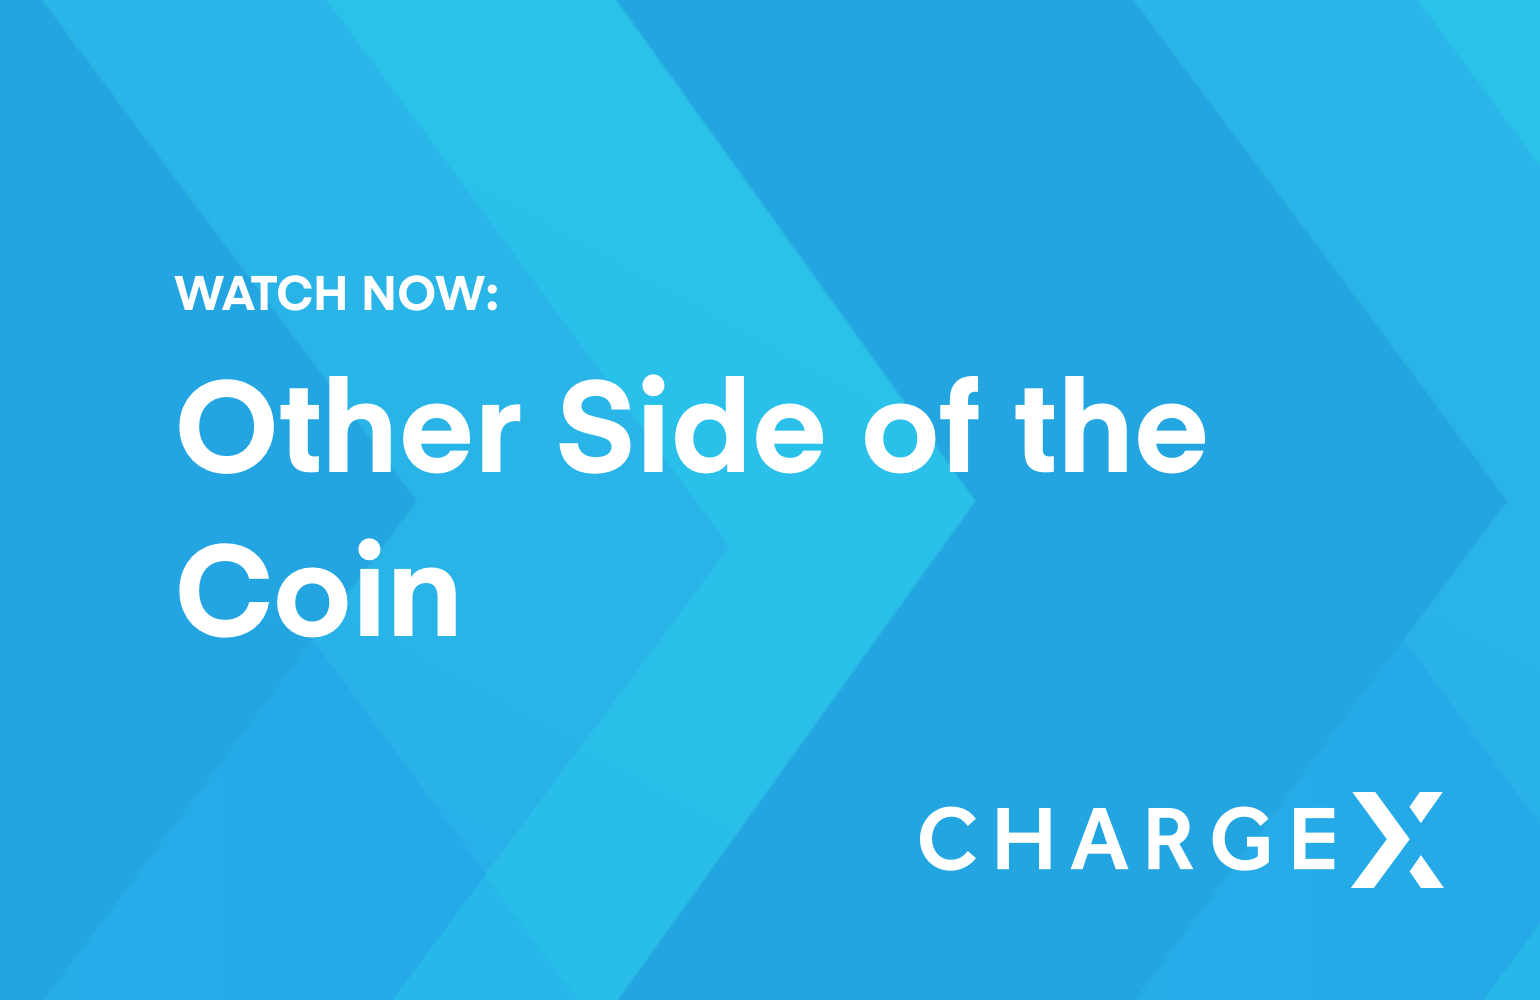 ChargeX: Other side of the coin